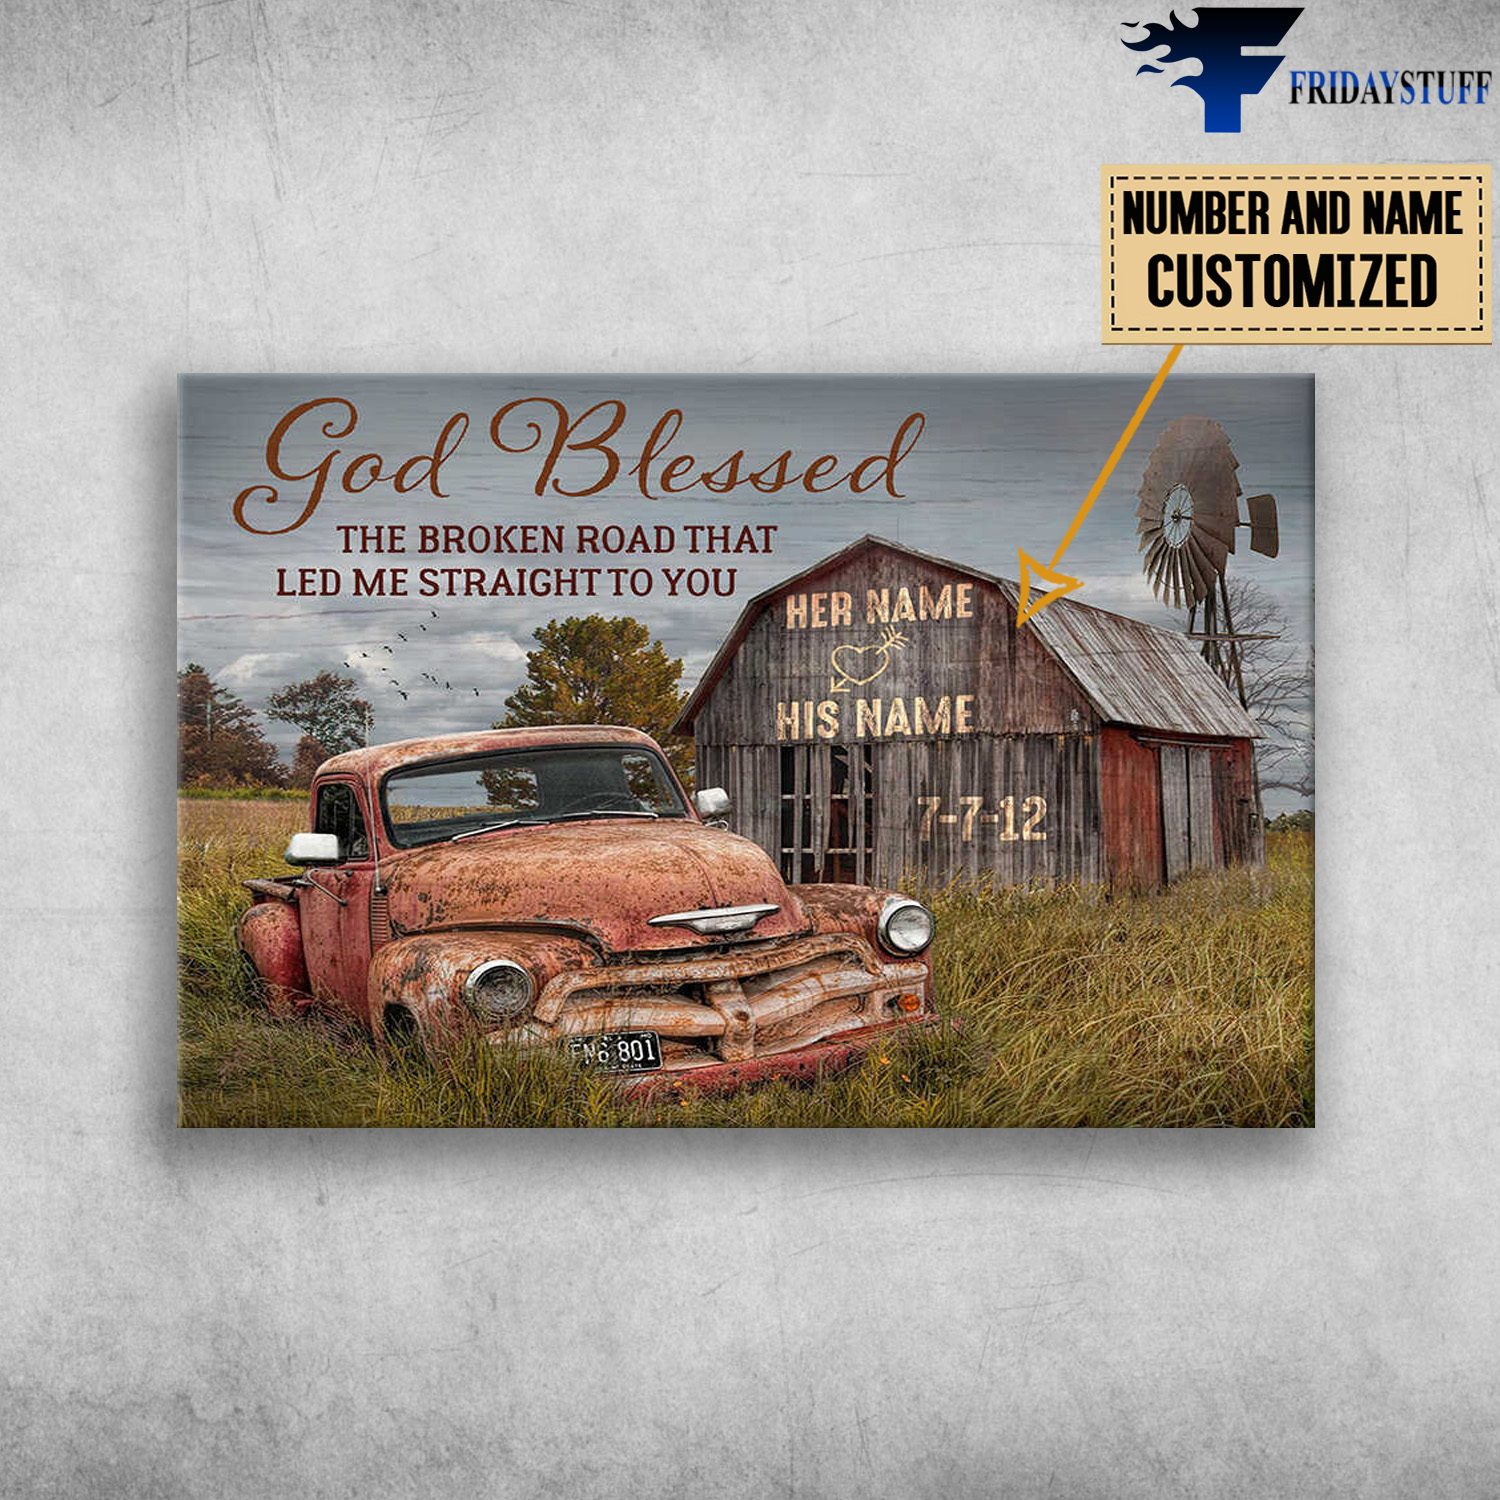 Truck And Farmhouse, God Blessed, The Broken Road That, Led Me Straight To You